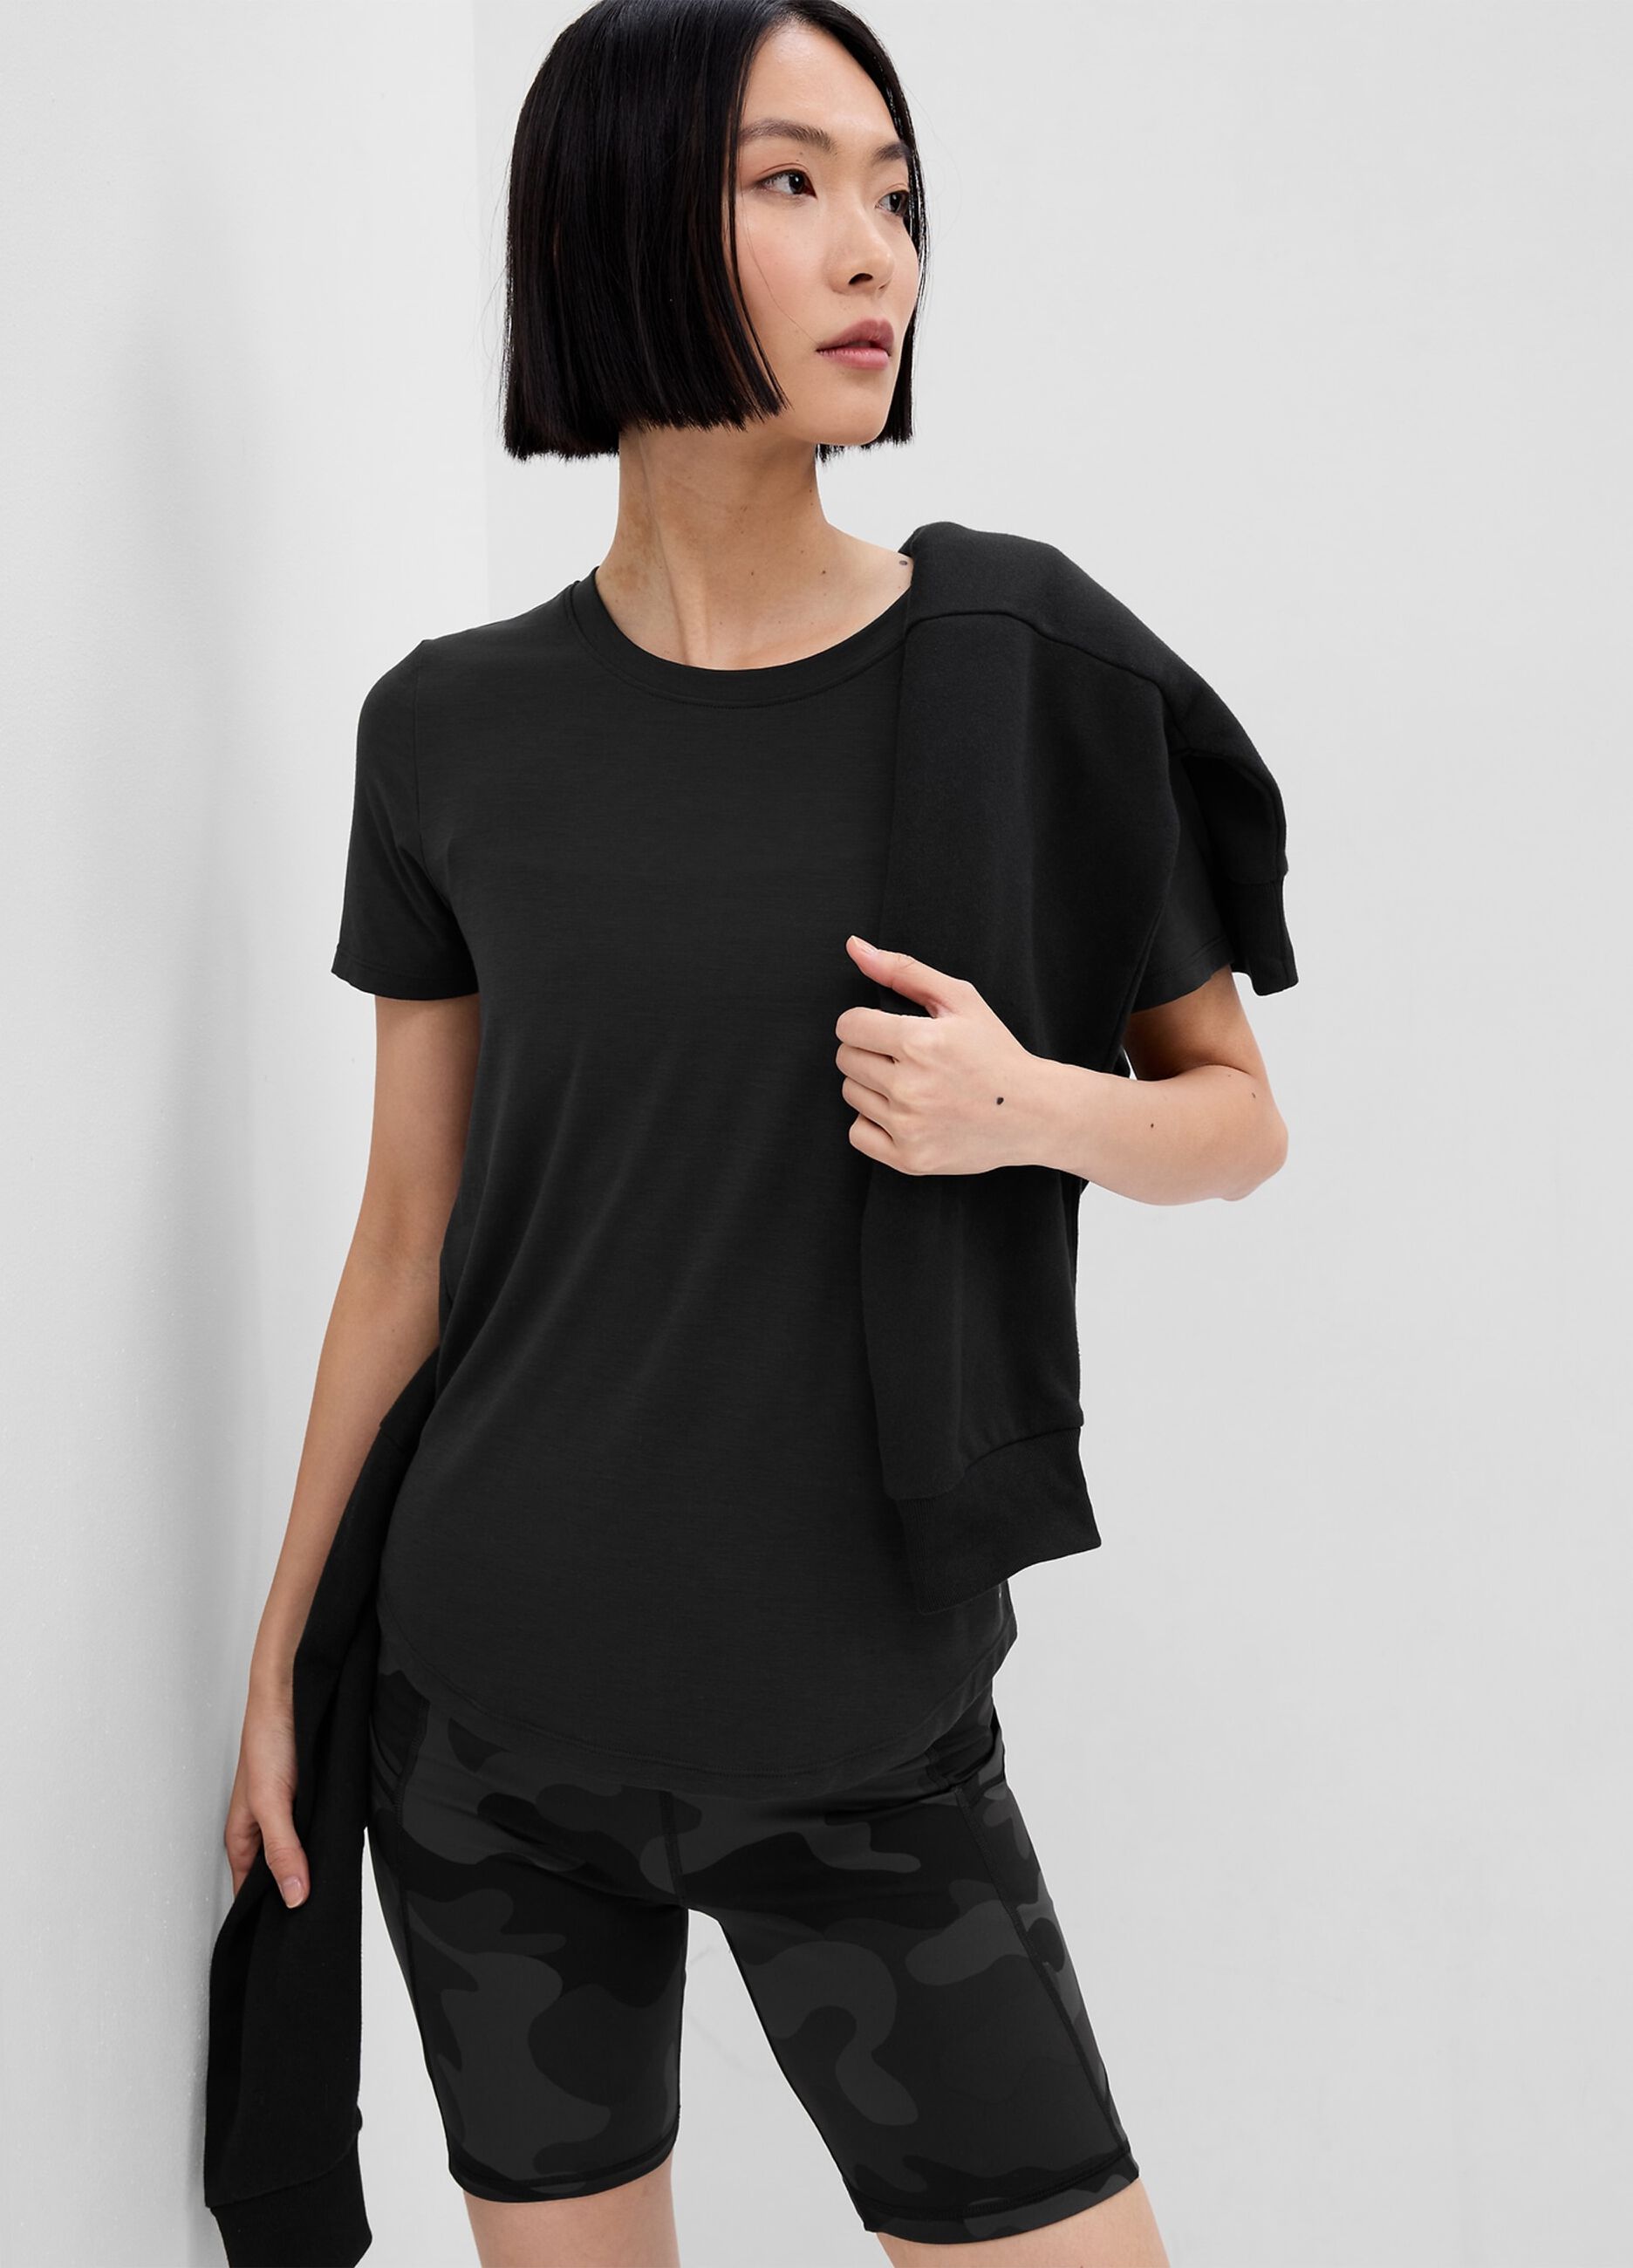 T-shirt in breathable fabric